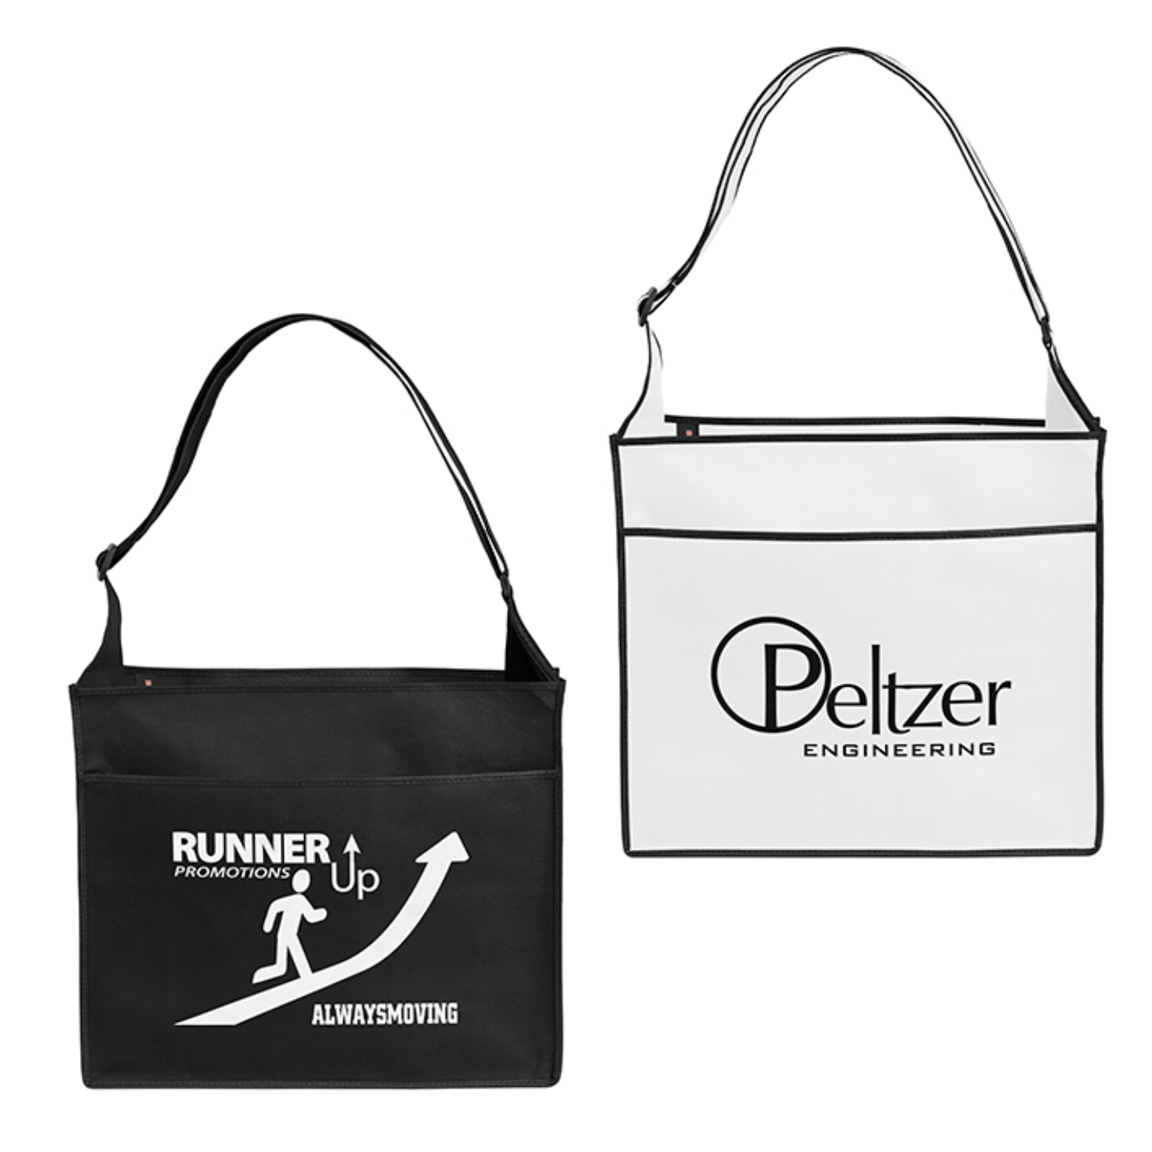 Trade Show Bags | Recycled | Sizes: 14x6x12 & 16x6x14